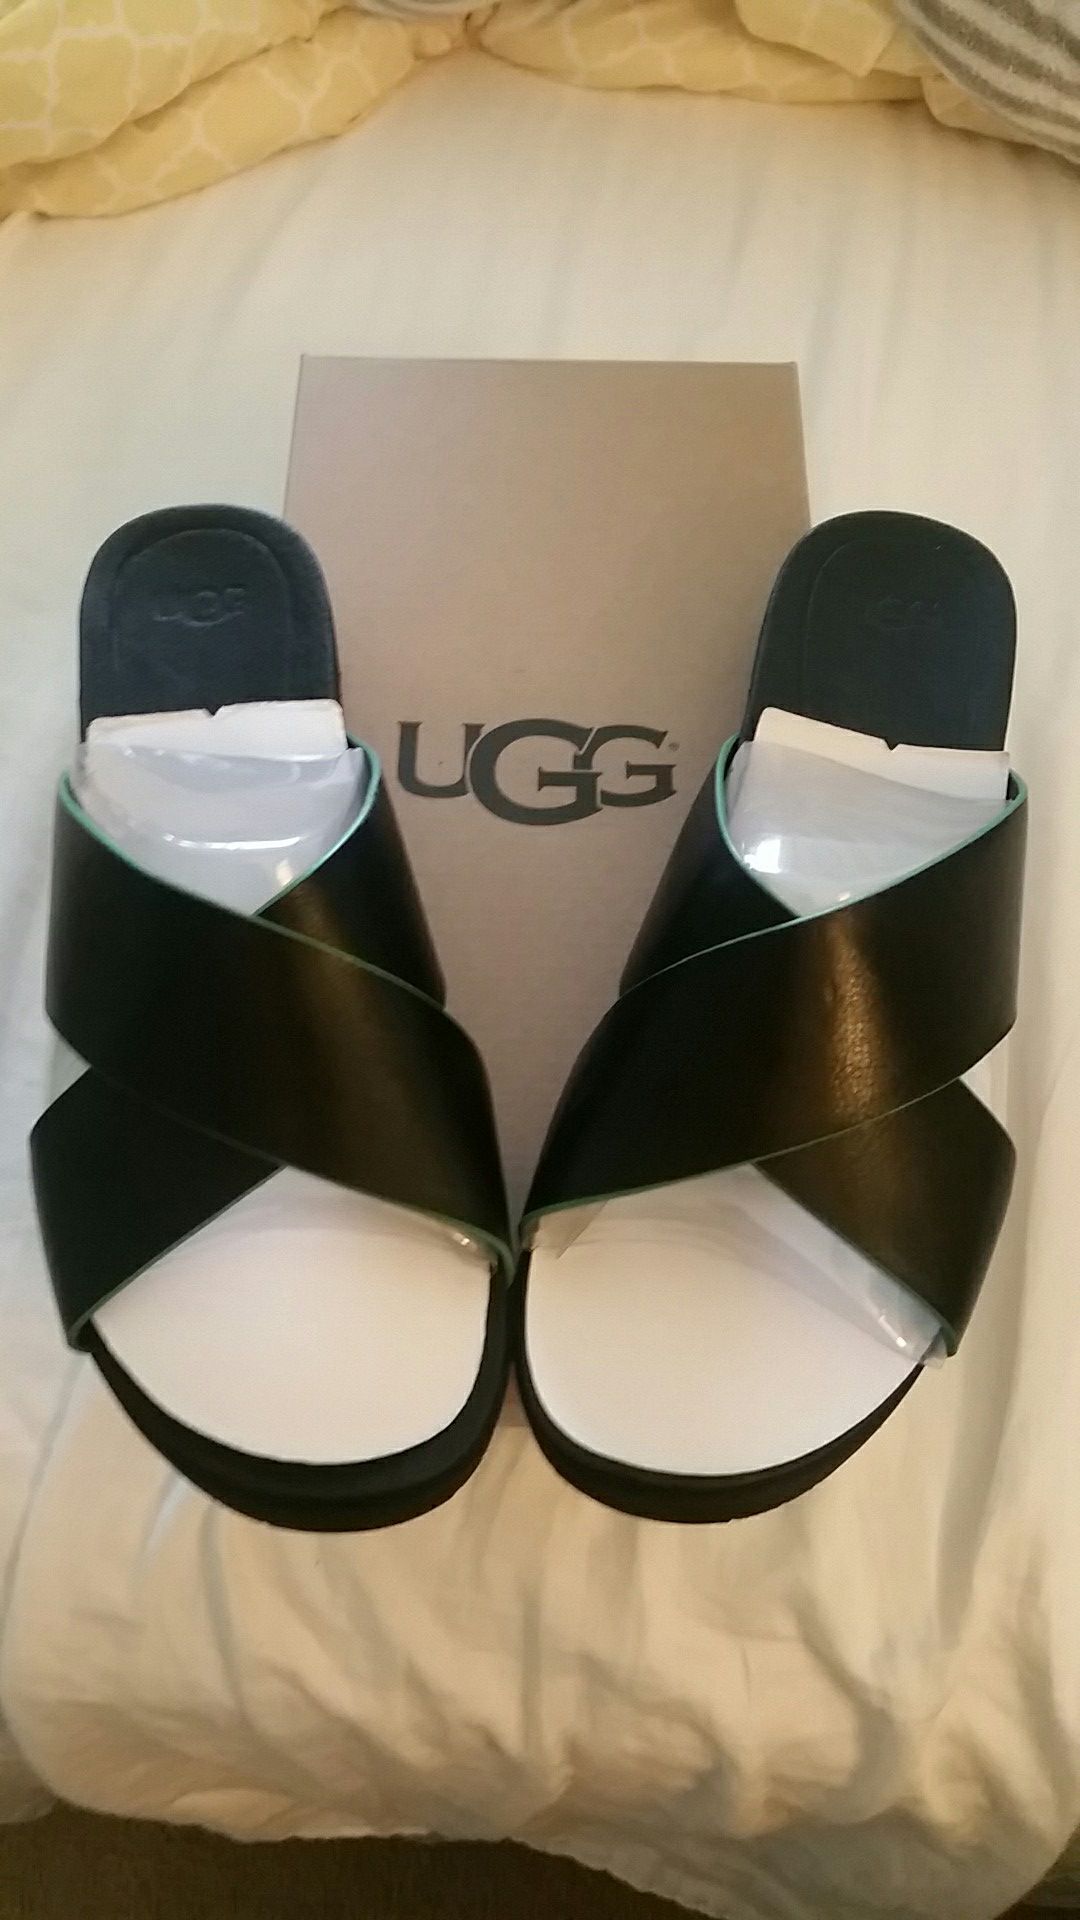 Leather Ugg sandals size 11